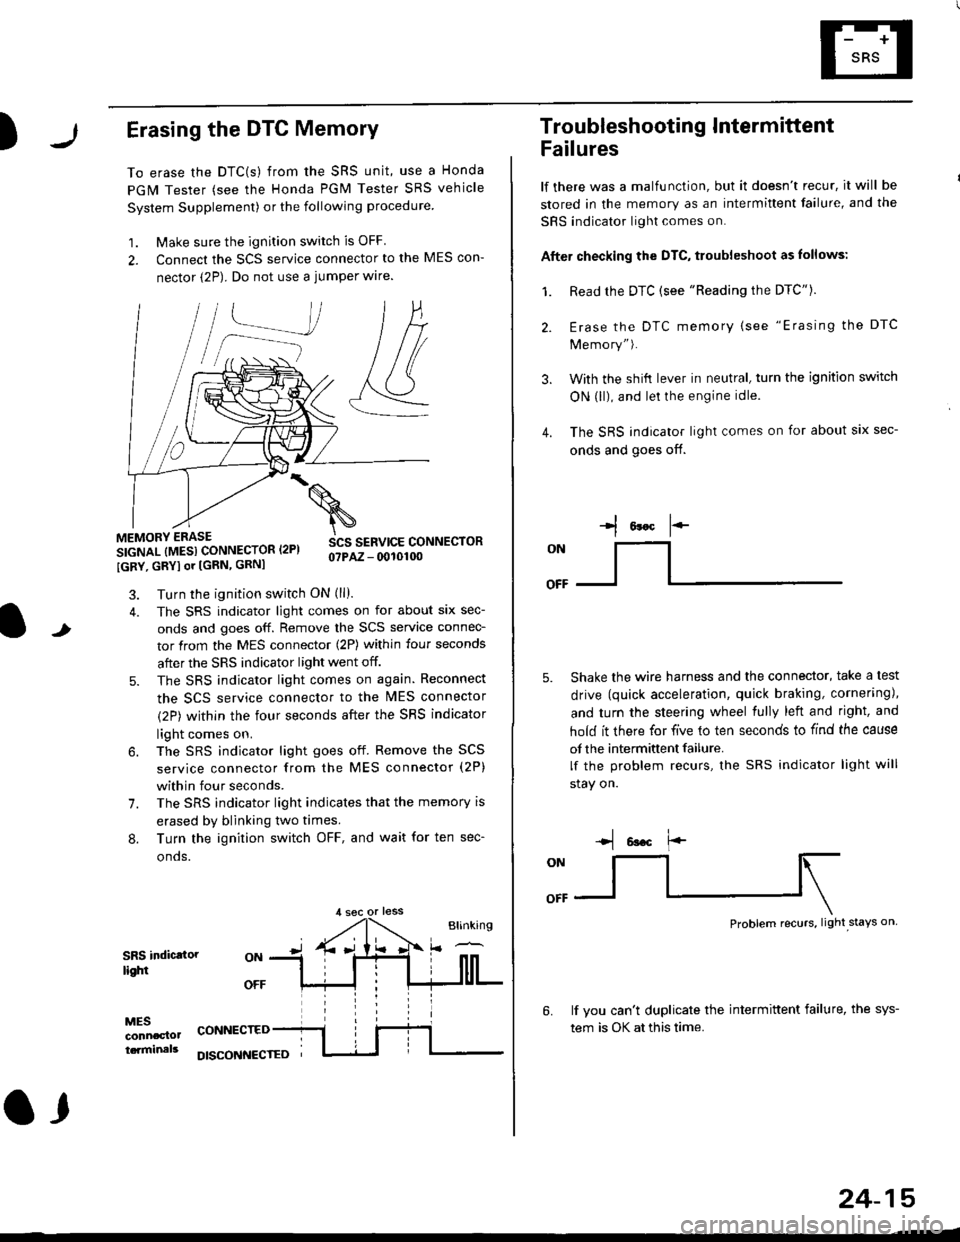 HONDA CIVIC 1997 6.G Service Manual )Erasing the DTC Memory
To erase the DTC(s) from the SRS unit, use a Honda
PGM Tester (see the Honda PGM Tester SRS vehicle
System Supplement) or the following procedure
1. Make sure the ignition swit